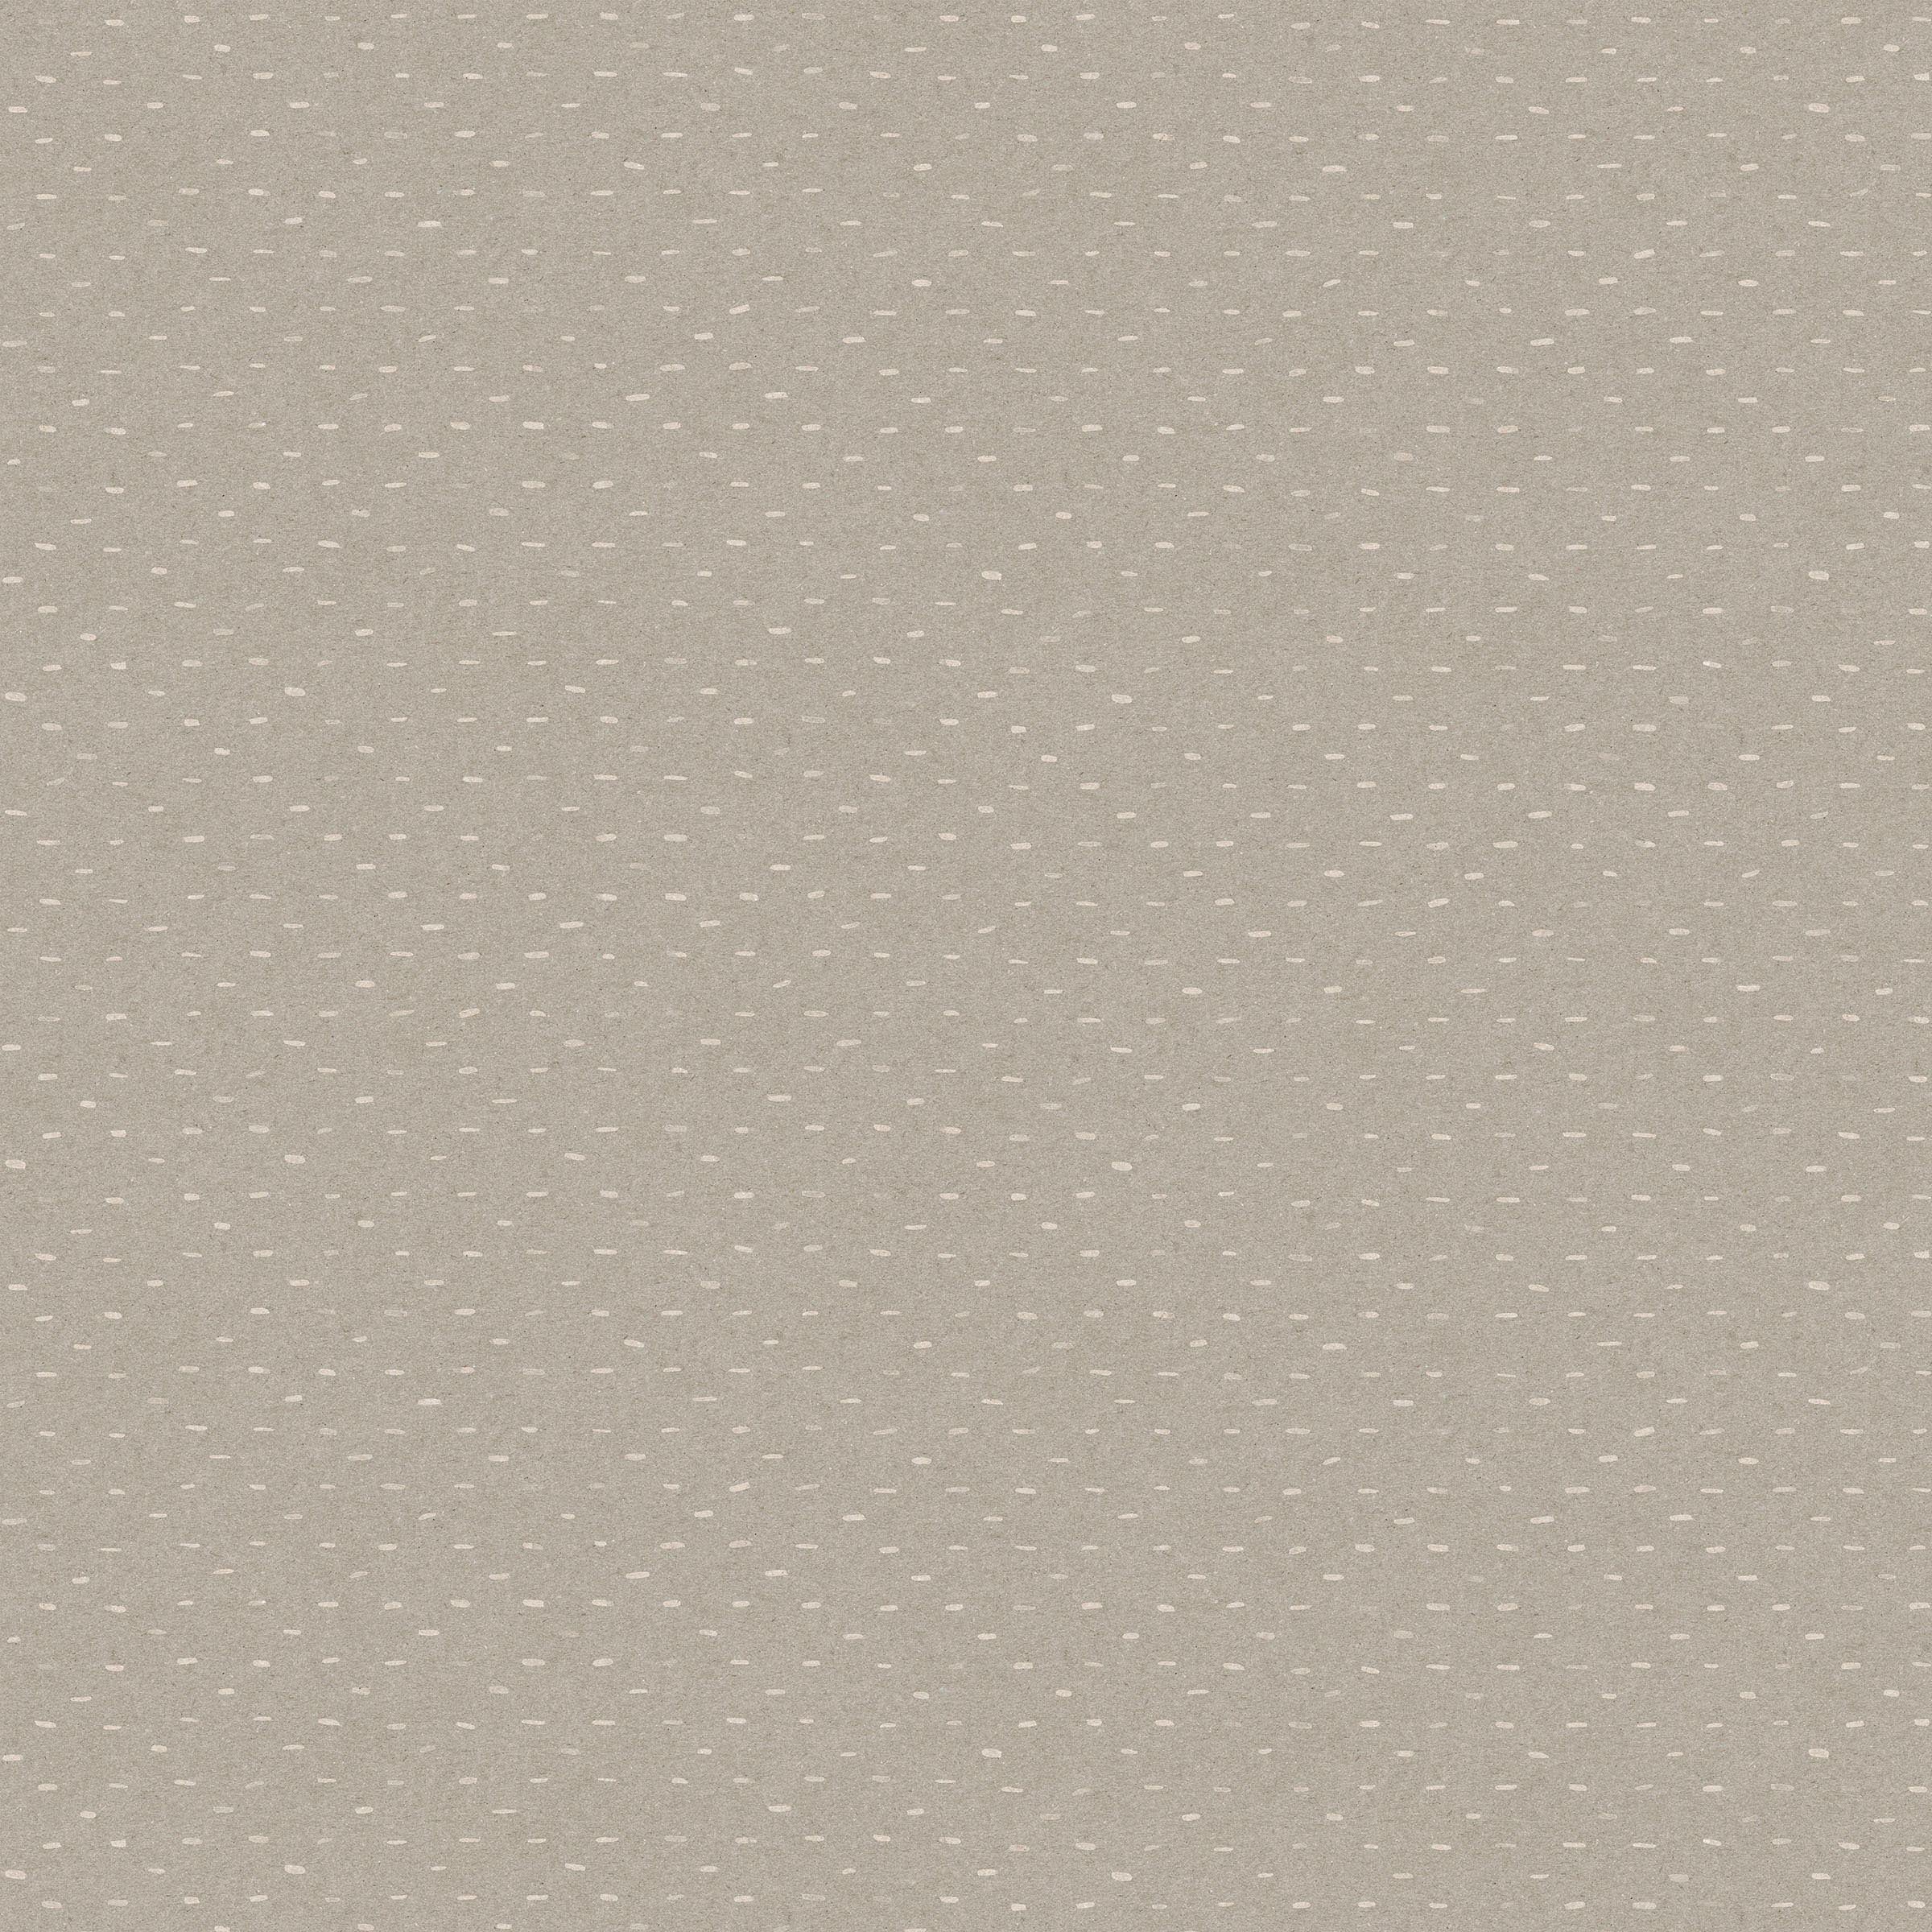 Detail of wallpaper in a dotted diamond grid in cream on a light brown field.